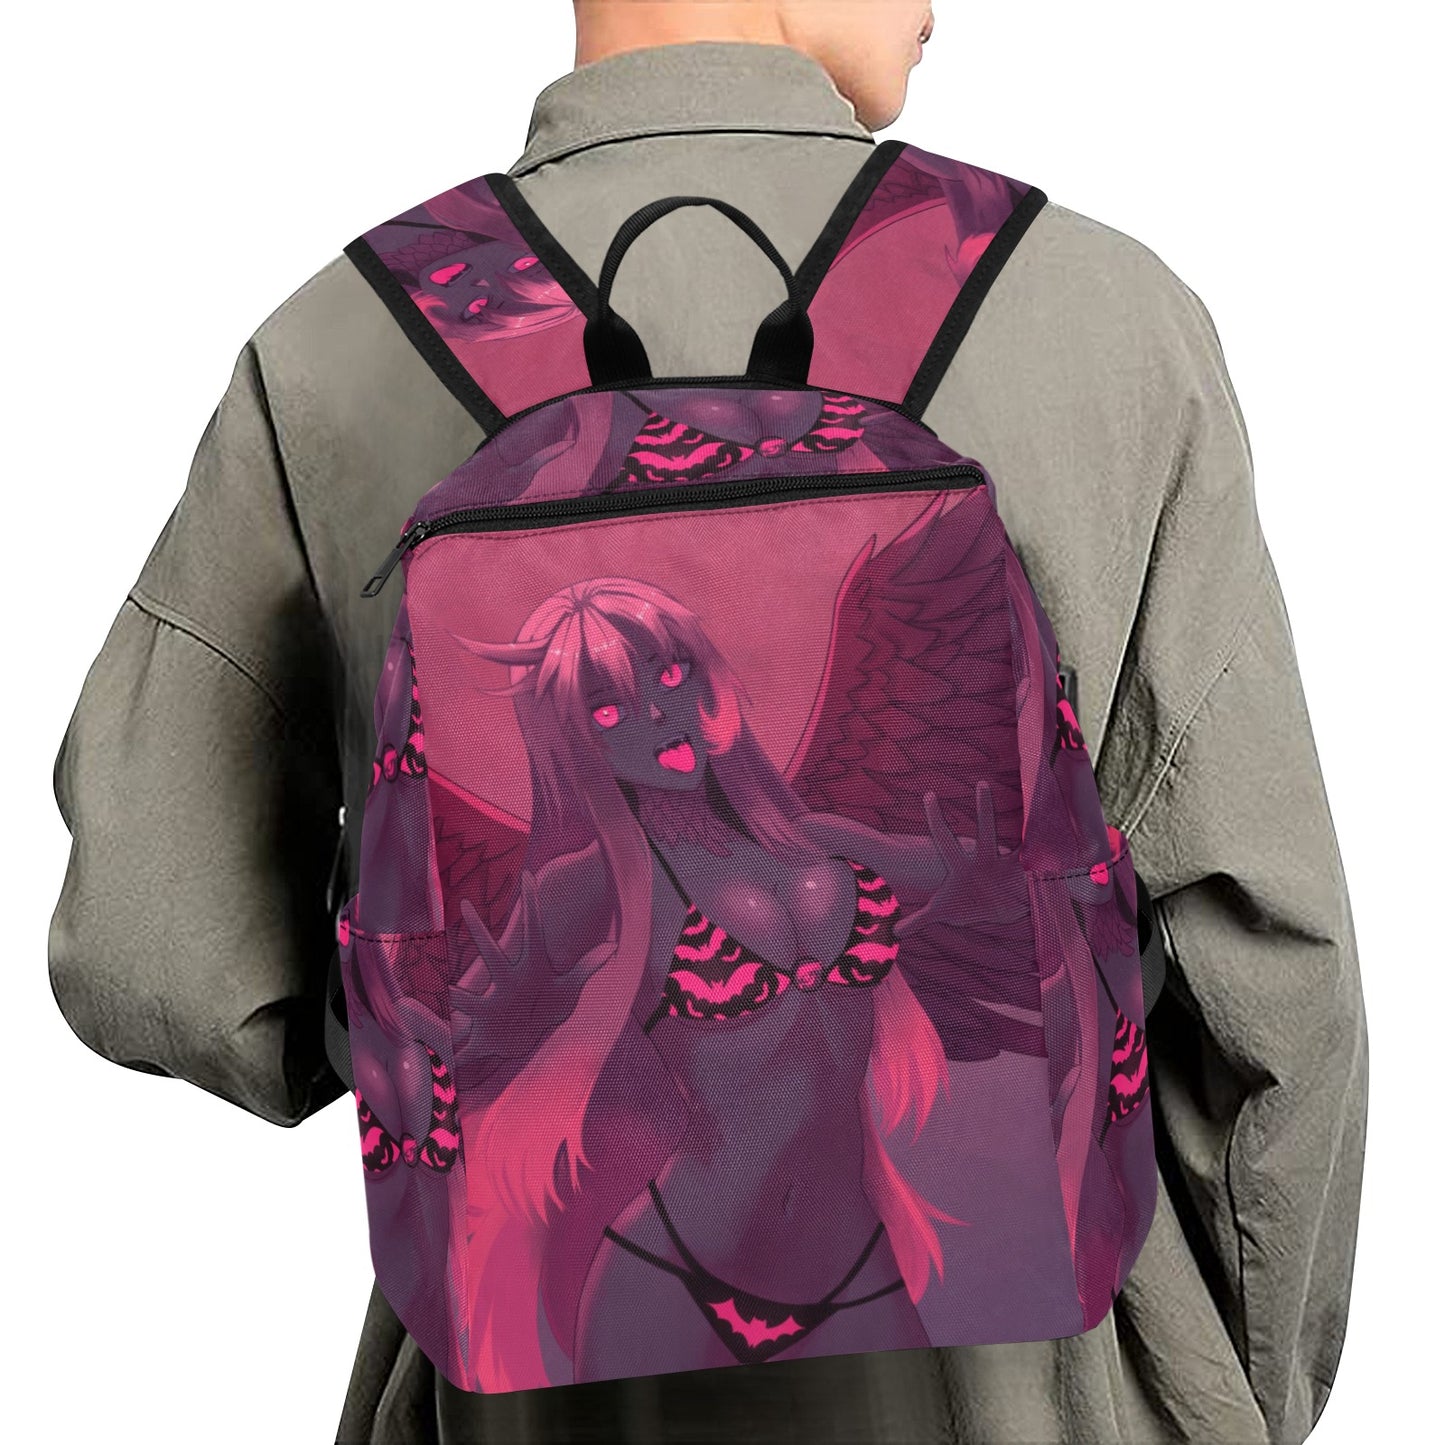 RTMColors#6-2 Backpack